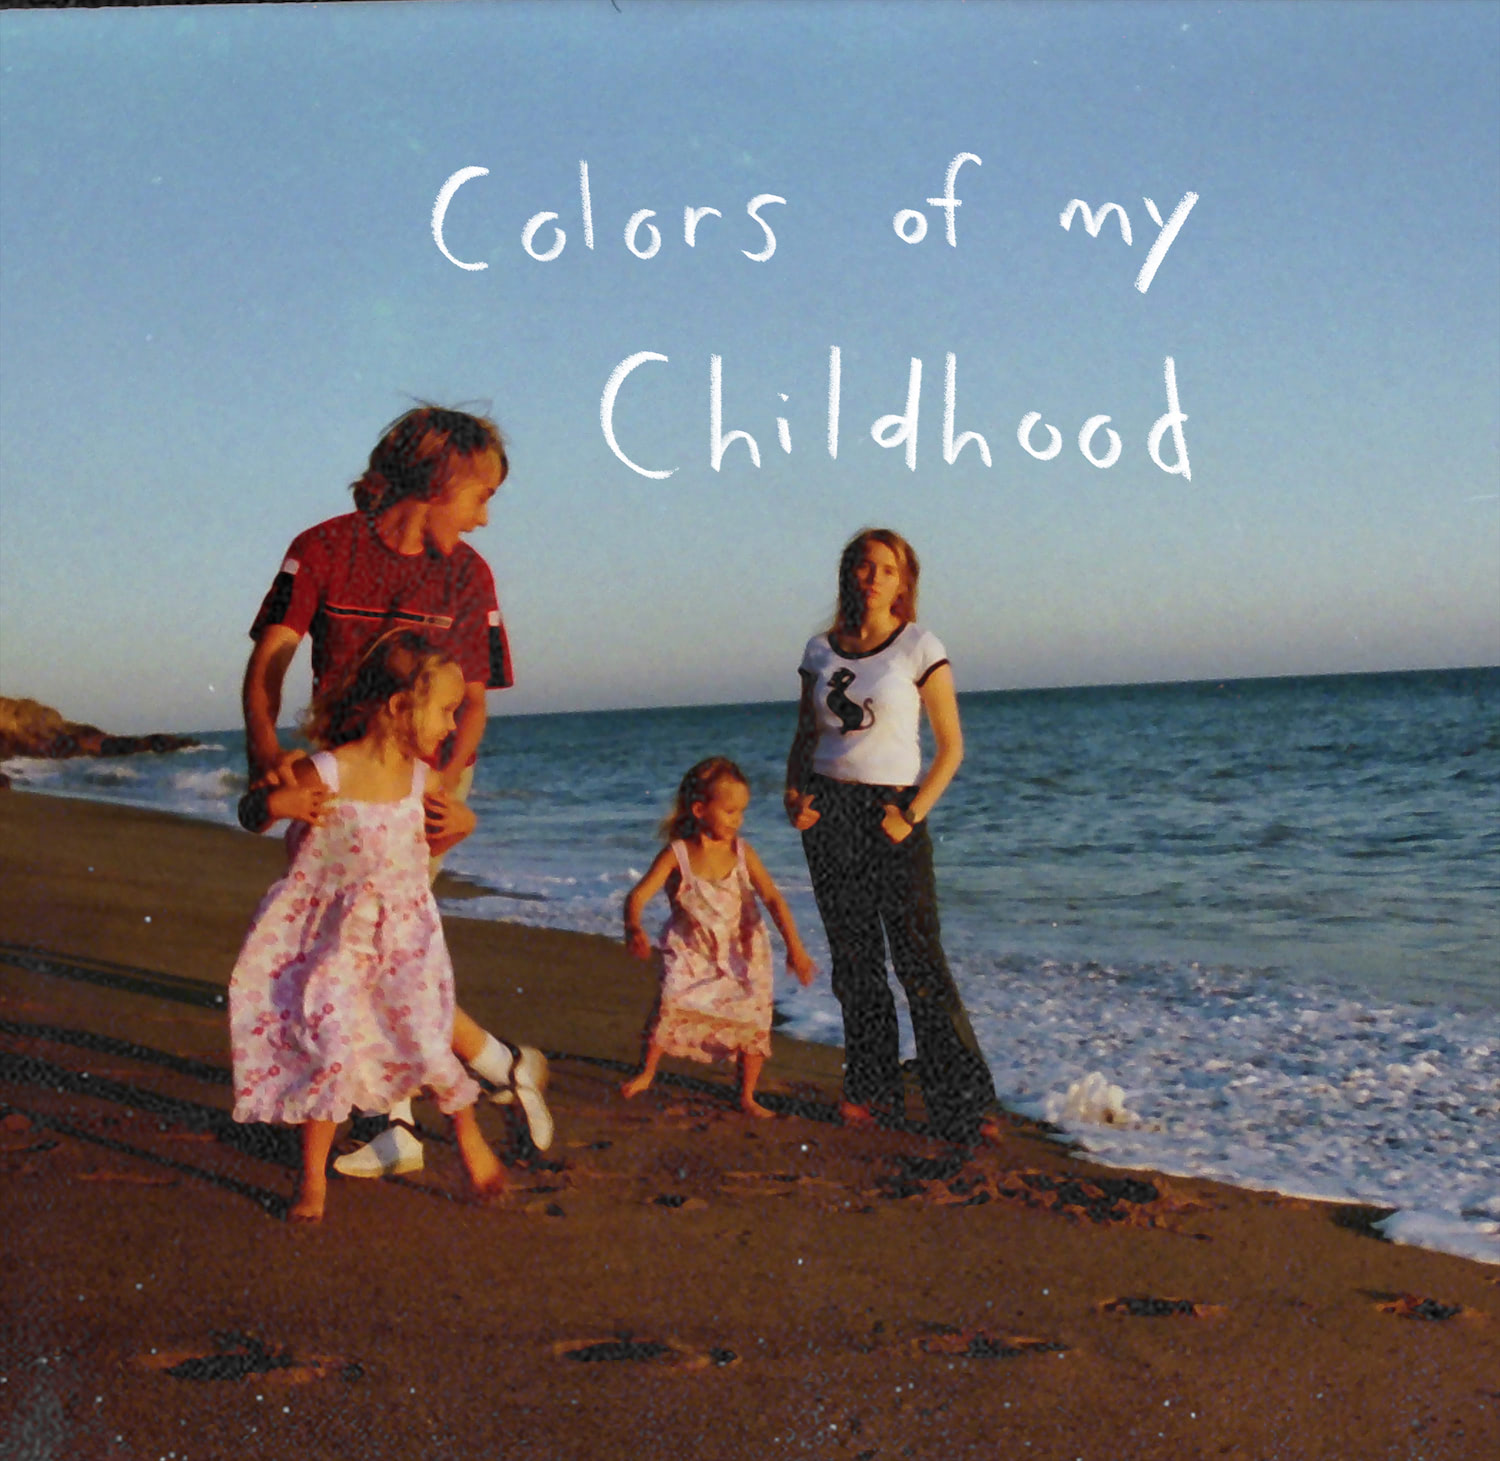 Colors of my Childhood opening photo shows a film picture of my siblings and I at the beach when I was a child.